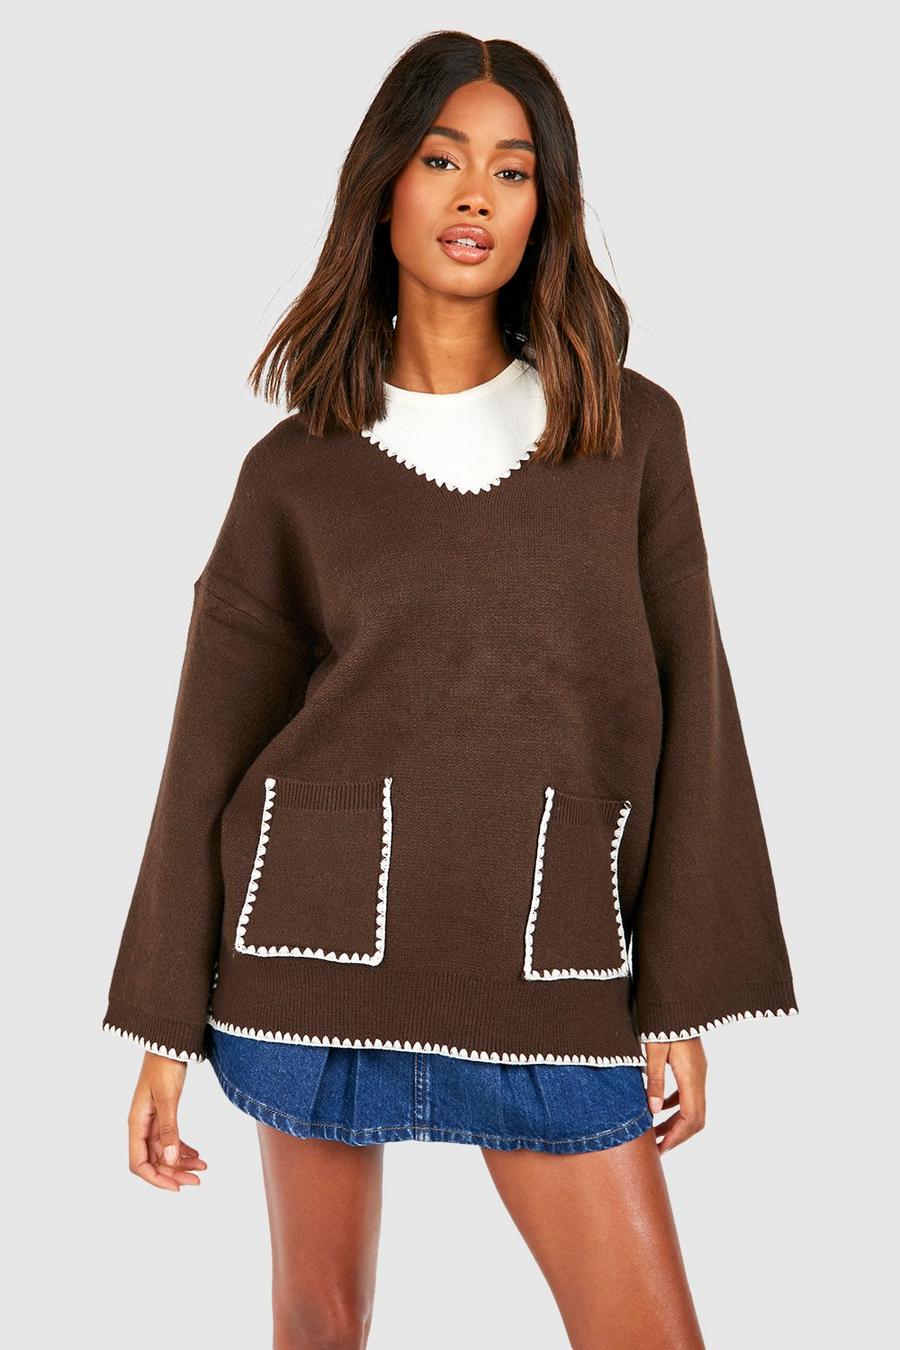 Maglione con cuciture a contrasto, Chocolate image number 1